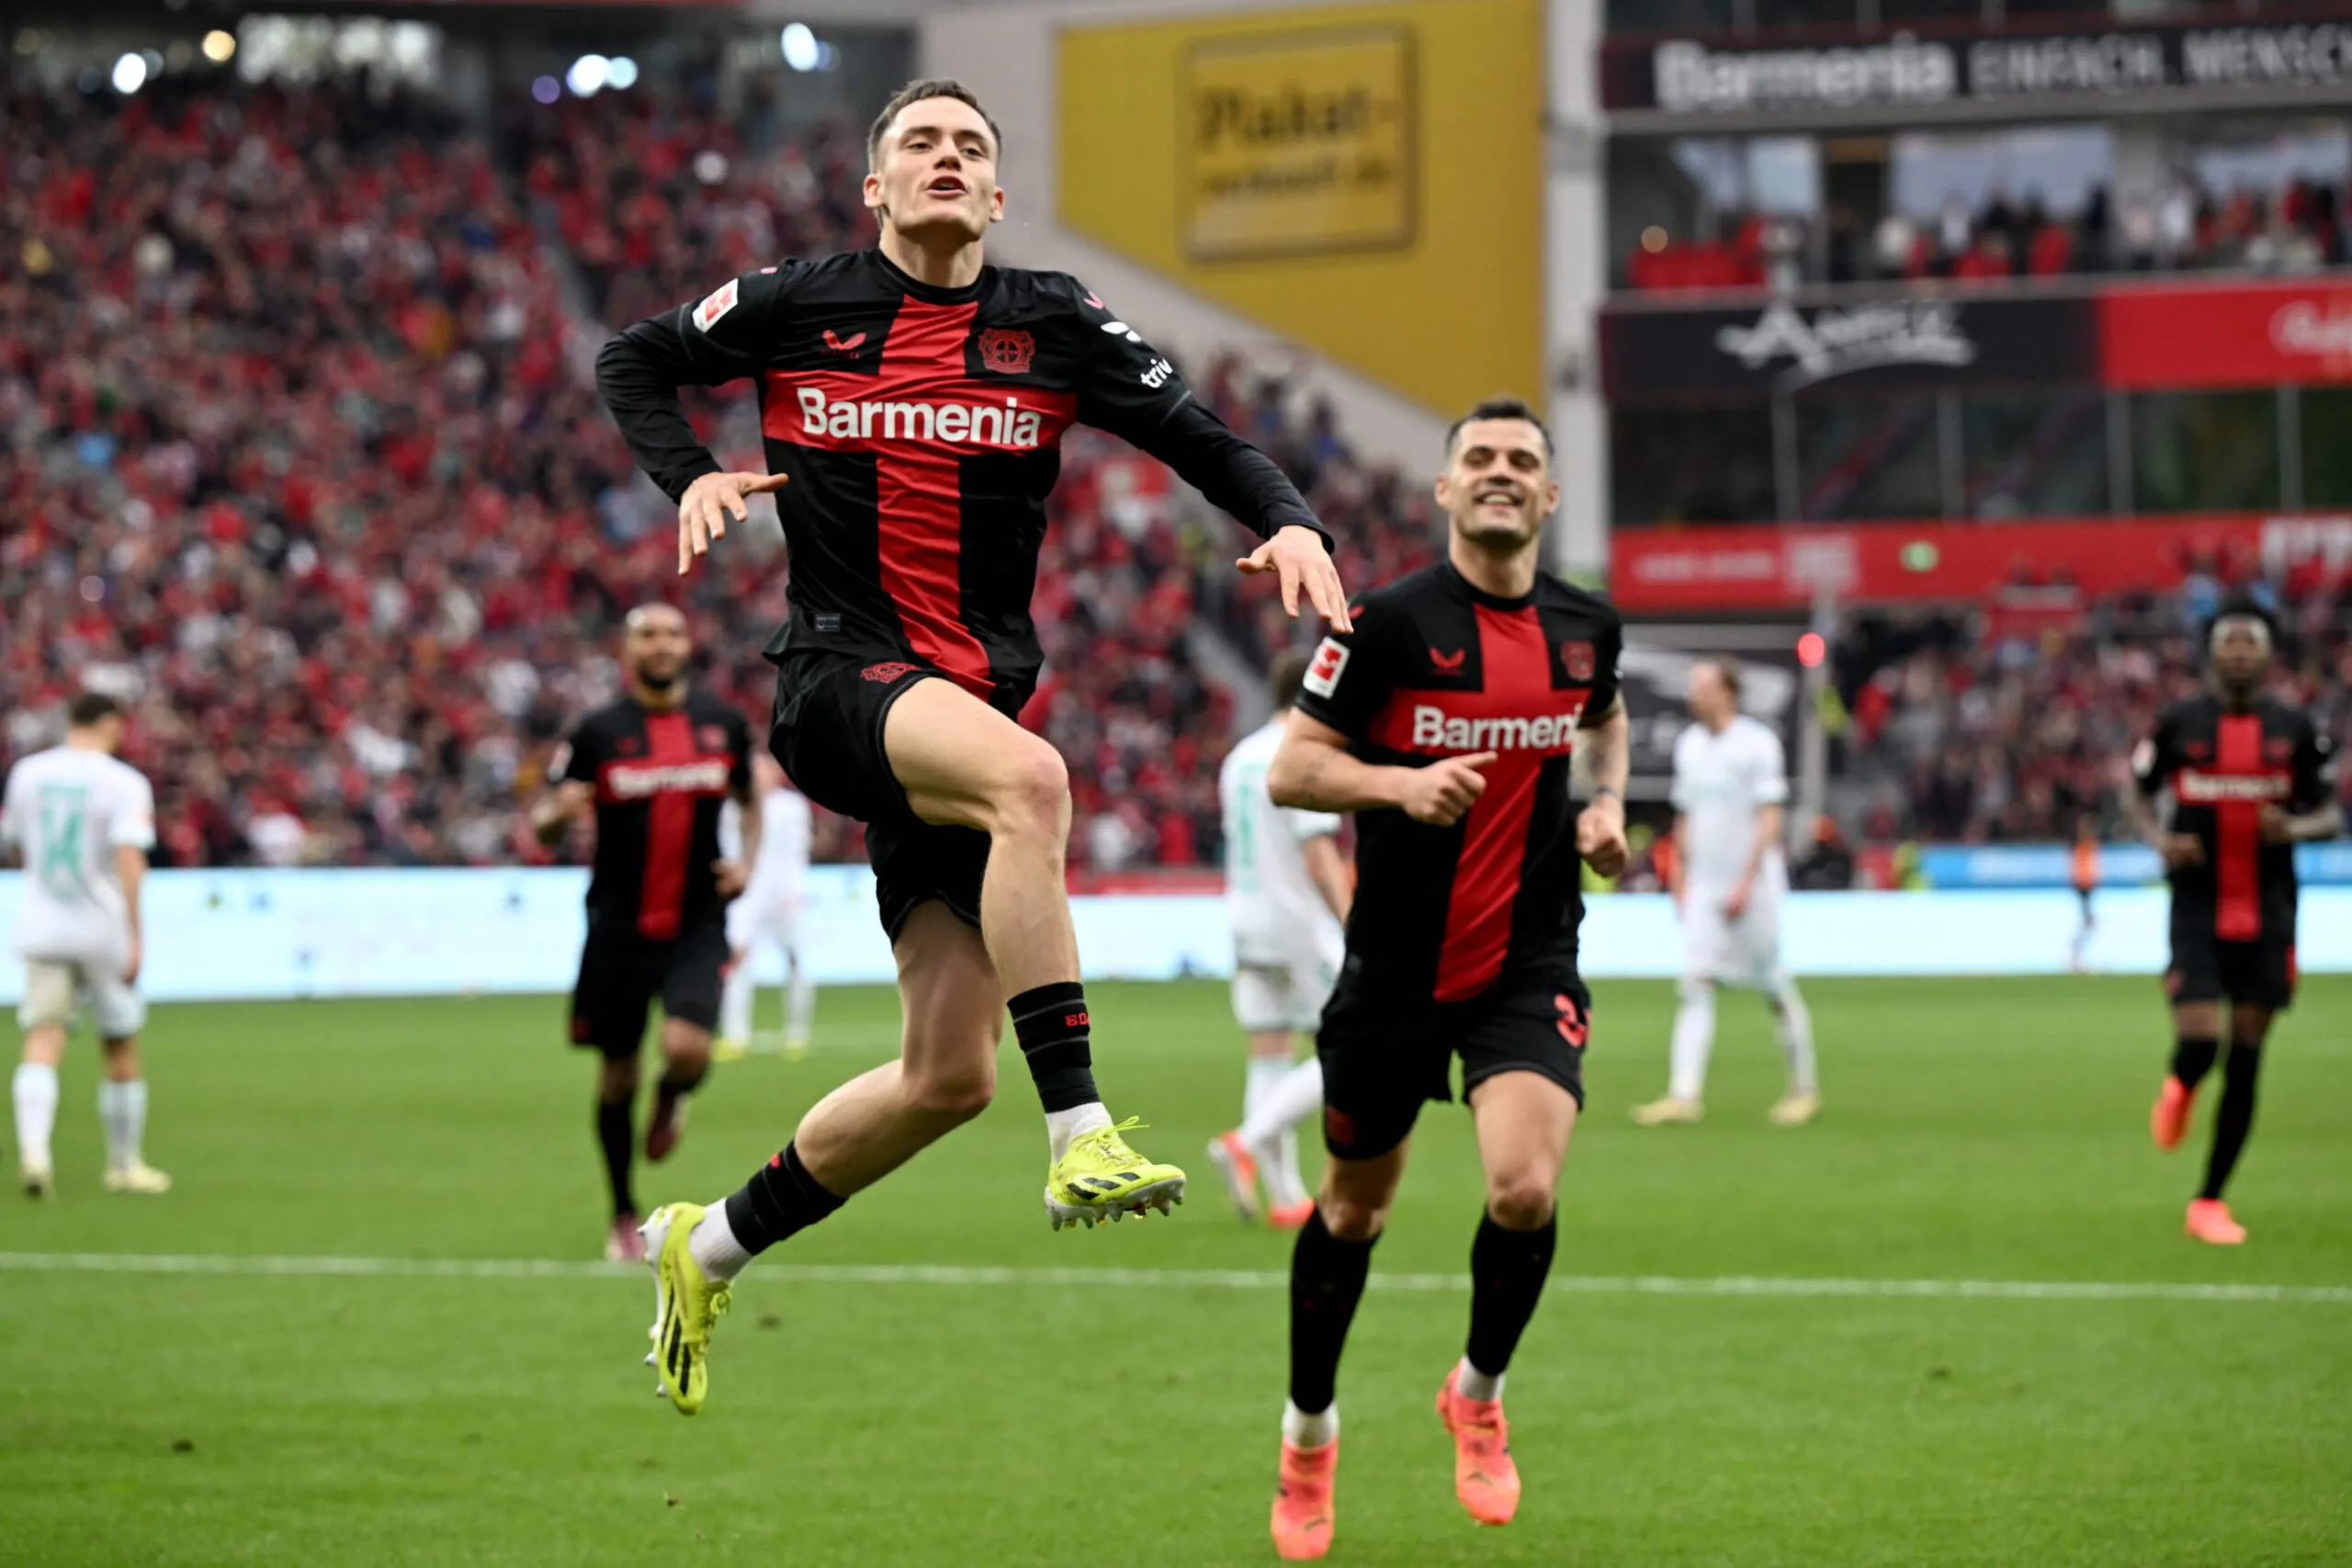 dpatop - 14 April 2024, North Rhine-Westphalia, Leverkusen: Soccer, Bundesliga, Bayer 04 Leverkusen - SV Werder Bremen, Matchday 29, BayArena. Leverkusen's Florian Wirtz (front) celebrates his goal to make it 3-0. IMPORTANT NOTE: In accordance with the regulations of the DFL German Football League and the DFB German Football Association, it is prohibited to use or have used photographs taken in the stadium and/or of the match in the form of sequential images and/or video-like photo series. Photo: Federico Gambarini/dpa Photo by Icon Sport   - Photo by Icon Sport